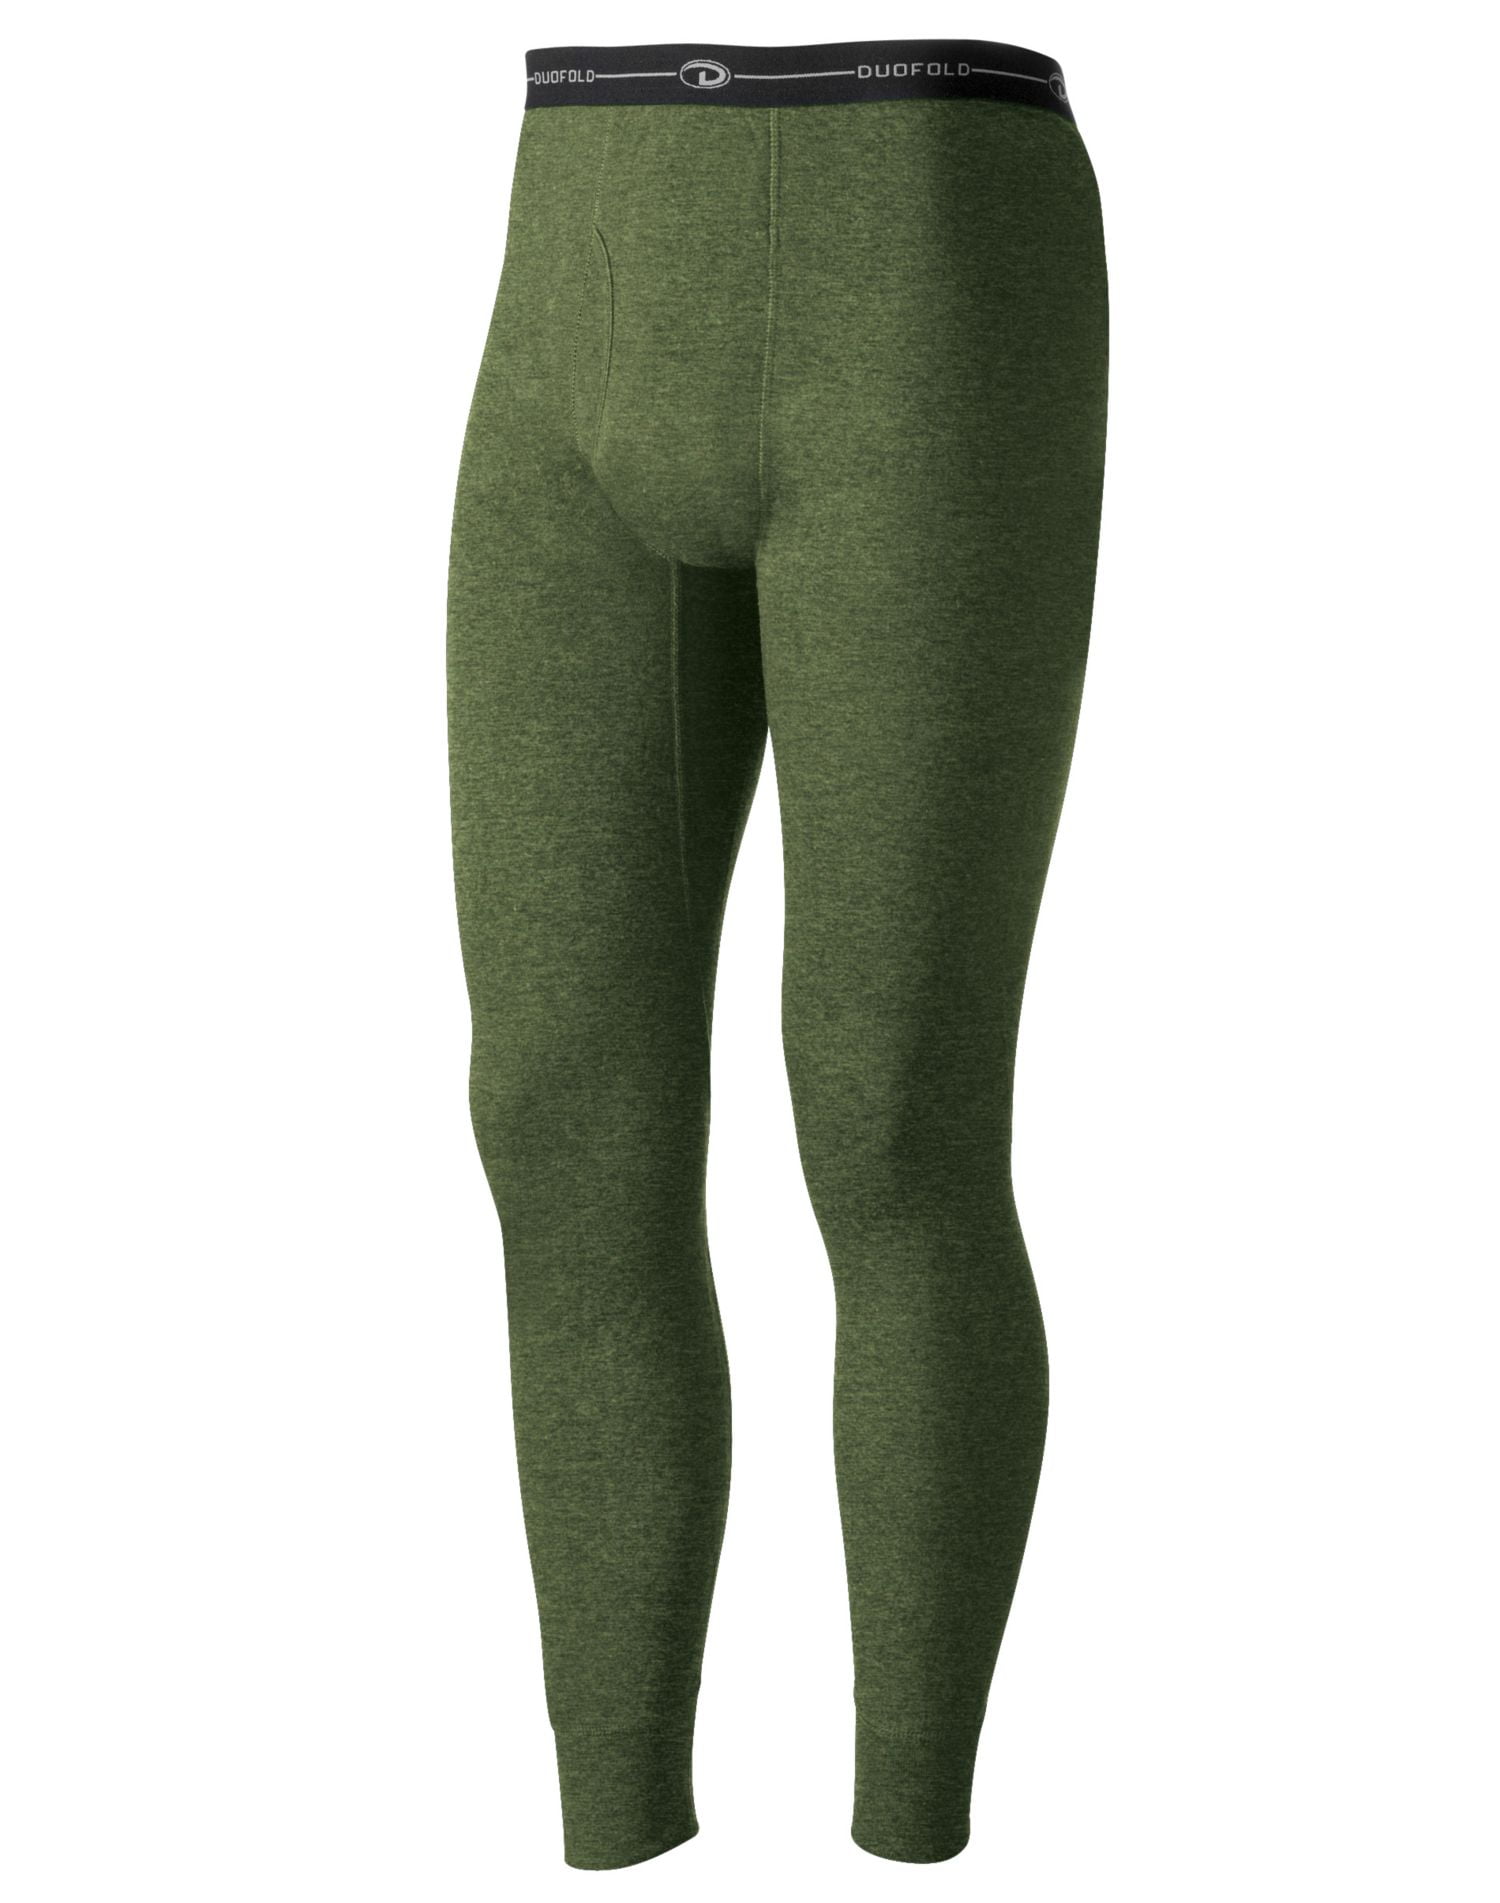 NEW 1 Omni Wool Mens Dual Layer Thermal BOTTOMS MANY SIZES AVA. 